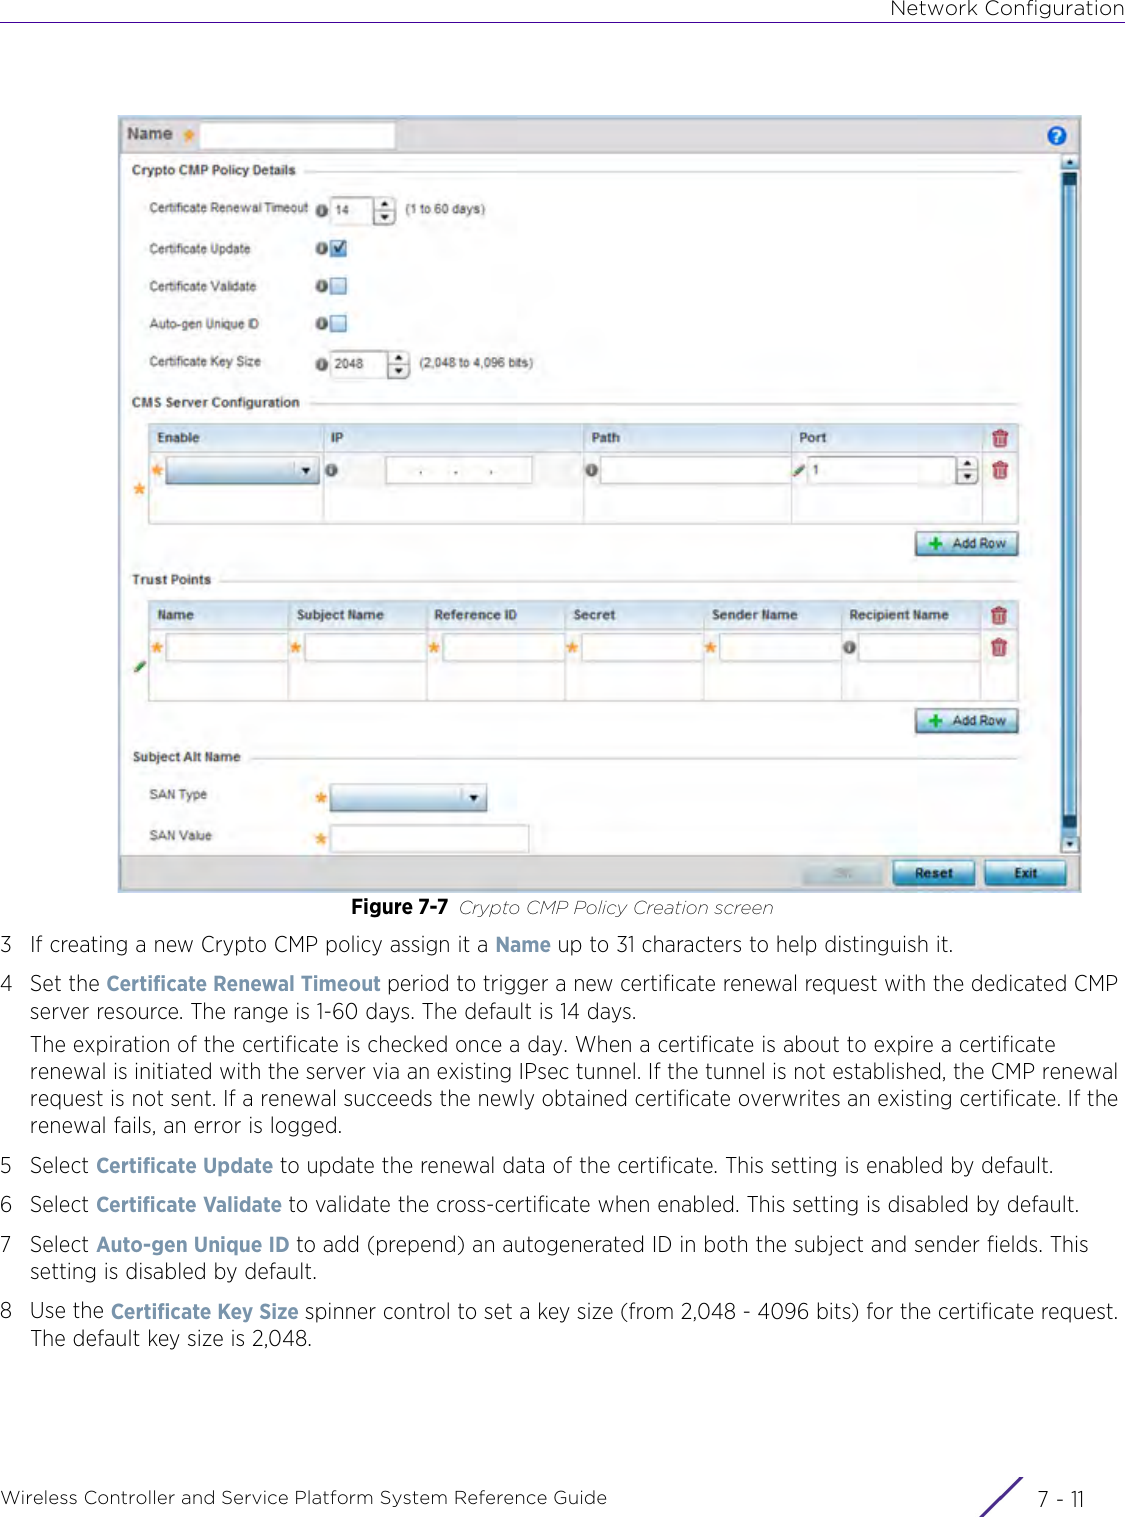 Network ConfigurationWireless Controller and Service Platform System Reference Guide 7 - 11Figure 7-7 Crypto CMP Policy Creation screen3 If creating a new Crypto CMP policy assign it a Name up to 31 characters to help distinguish it.4 Set the Certificate Renewal Timeout period to trigger a new certificate renewal request with the dedicated CMP server resource. The range is 1-60 days. The default is 14 days.The expiration of the certificate is checked once a day. When a certificate is about to expire a certificate renewal is initiated with the server via an existing IPsec tunnel. If the tunnel is not established, the CMP renewal request is not sent. If a renewal succeeds the newly obtained certificate overwrites an existing certificate. If the renewal fails, an error is logged.5Select Certificate Update to update the renewal data of the certificate. This setting is enabled by default.6Select Certificate Validate to validate the cross-certificate when enabled. This setting is disabled by default.7Select Auto-gen Unique ID to add (prepend) an autogenerated ID in both the subject and sender fields. This setting is disabled by default.8Use the Certificate Key Size spinner control to set a key size (from 2,048 - 4096 bits) for the certificate request. The default key size is 2,048. 